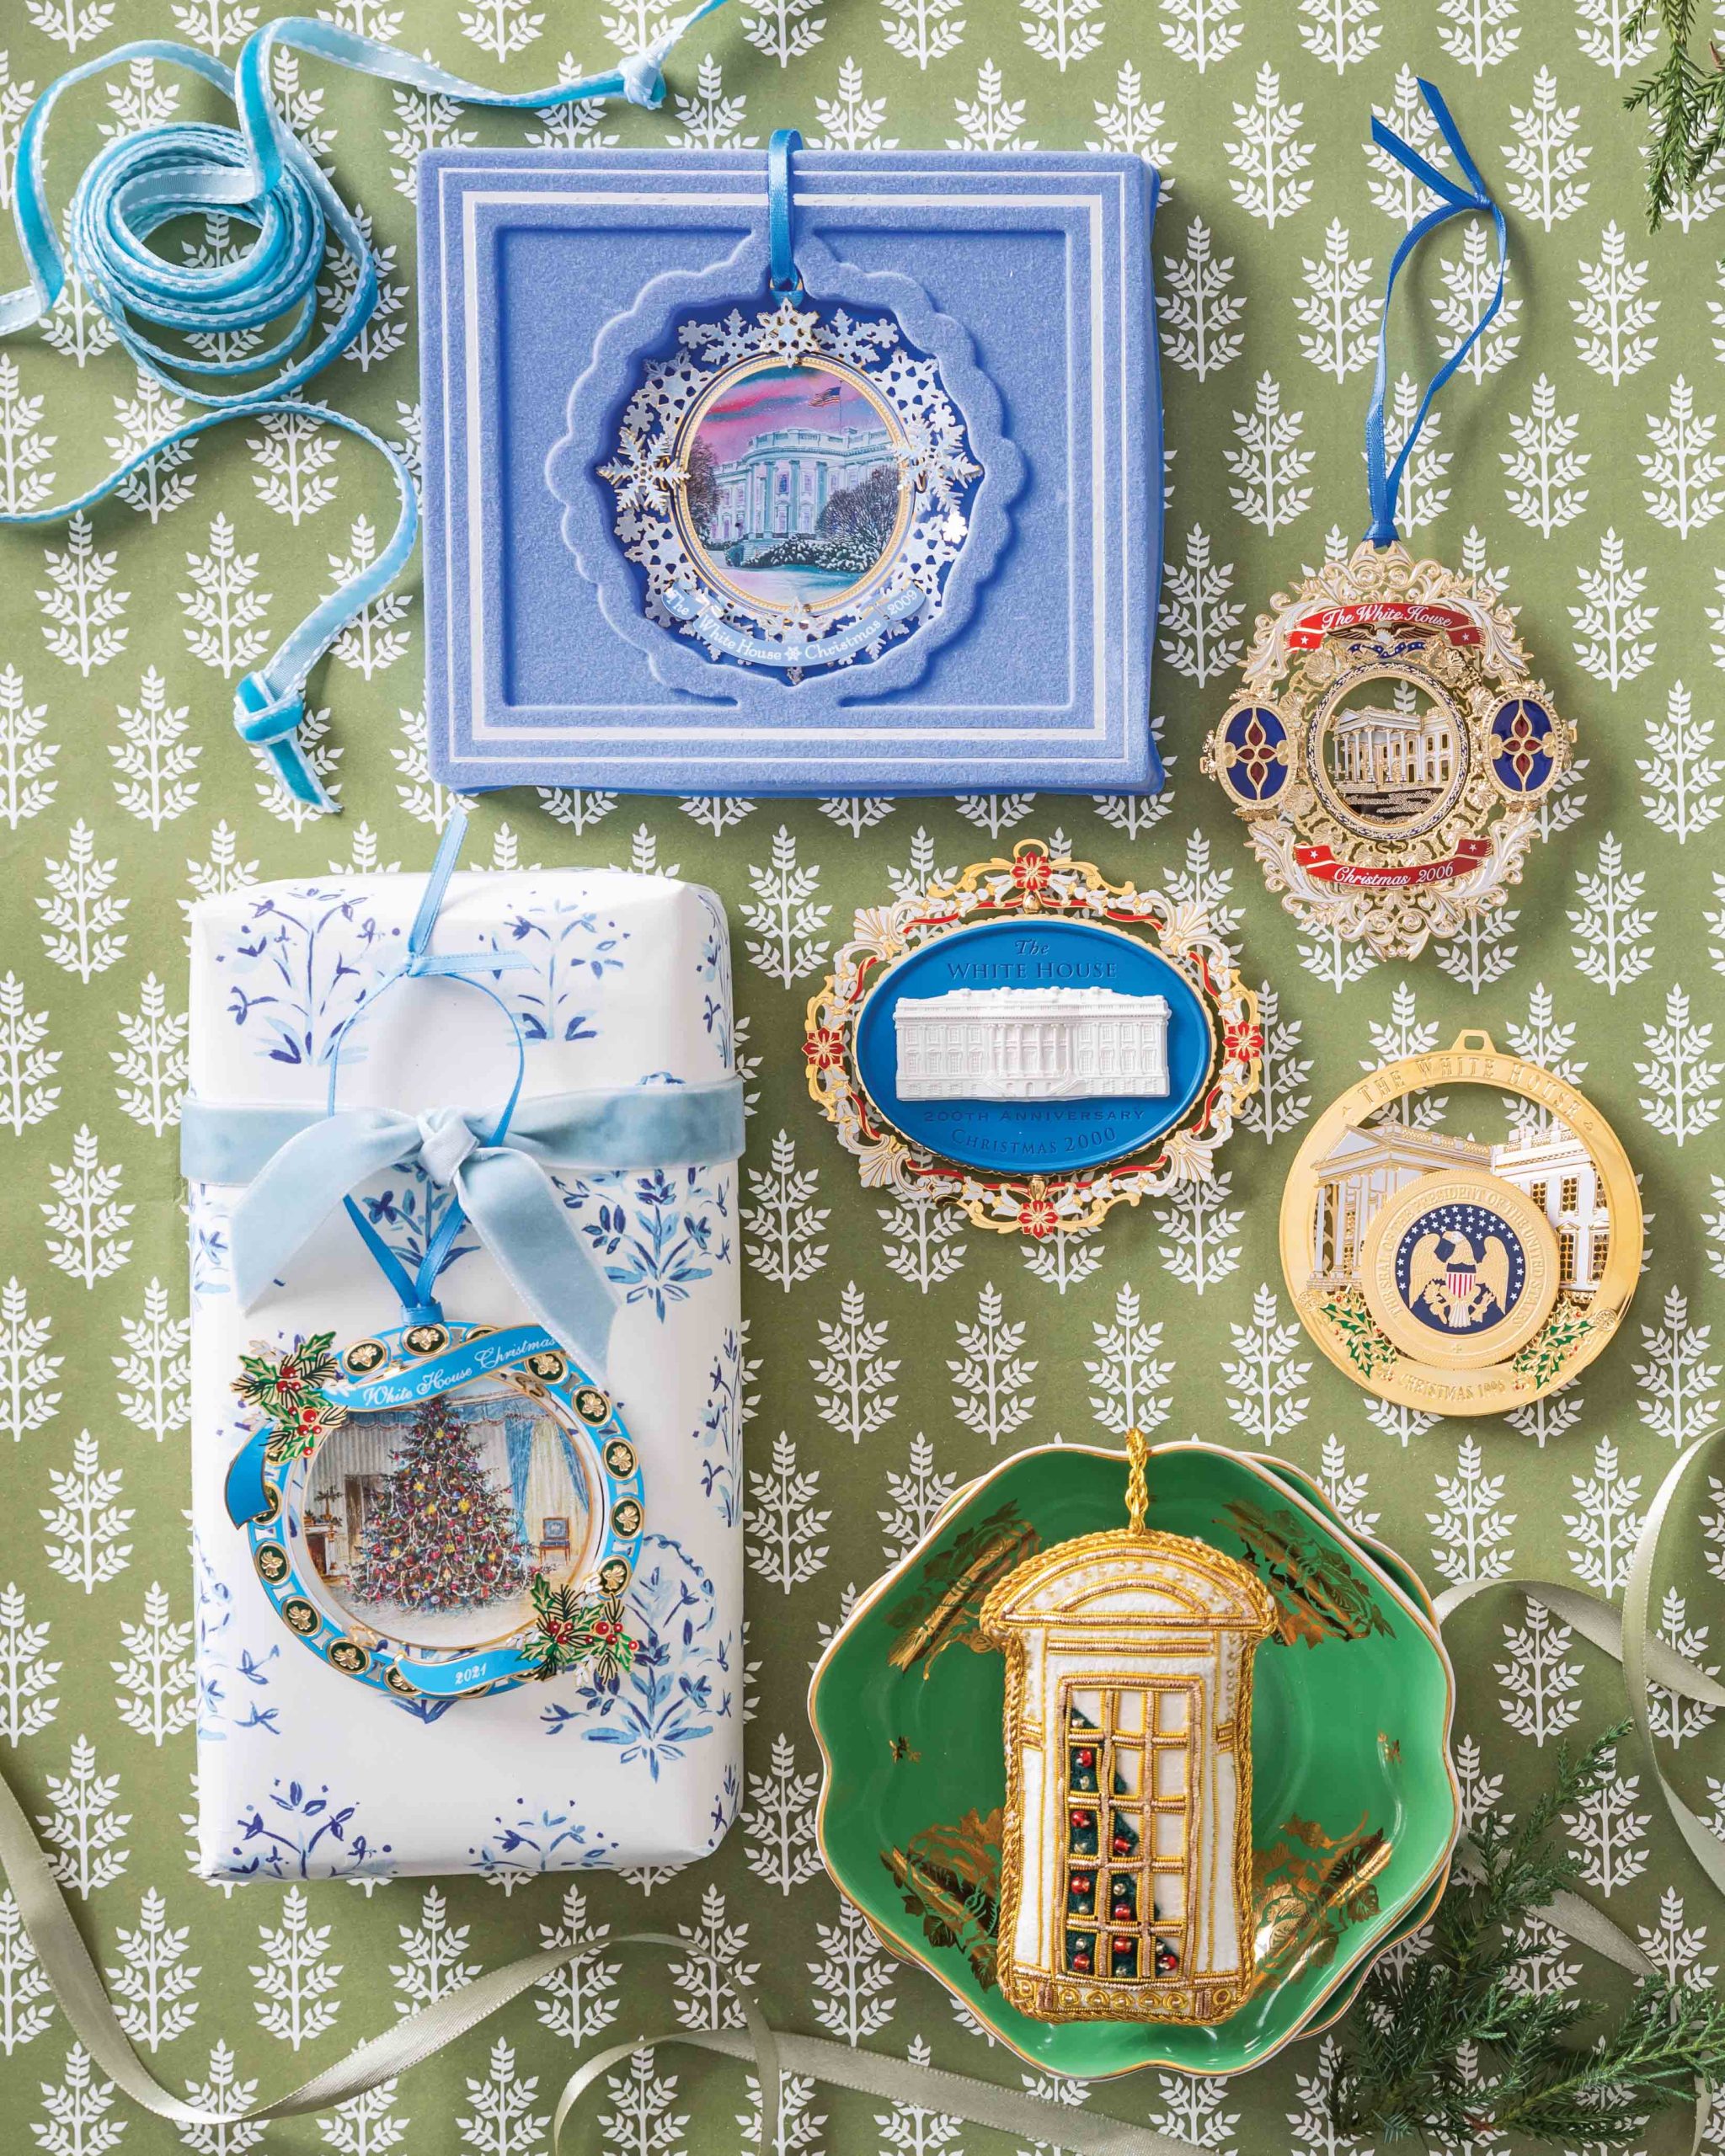 Set against a green and white pattern, a collection of detailed Christmas ornaments from The White House Historical Association is displayed.